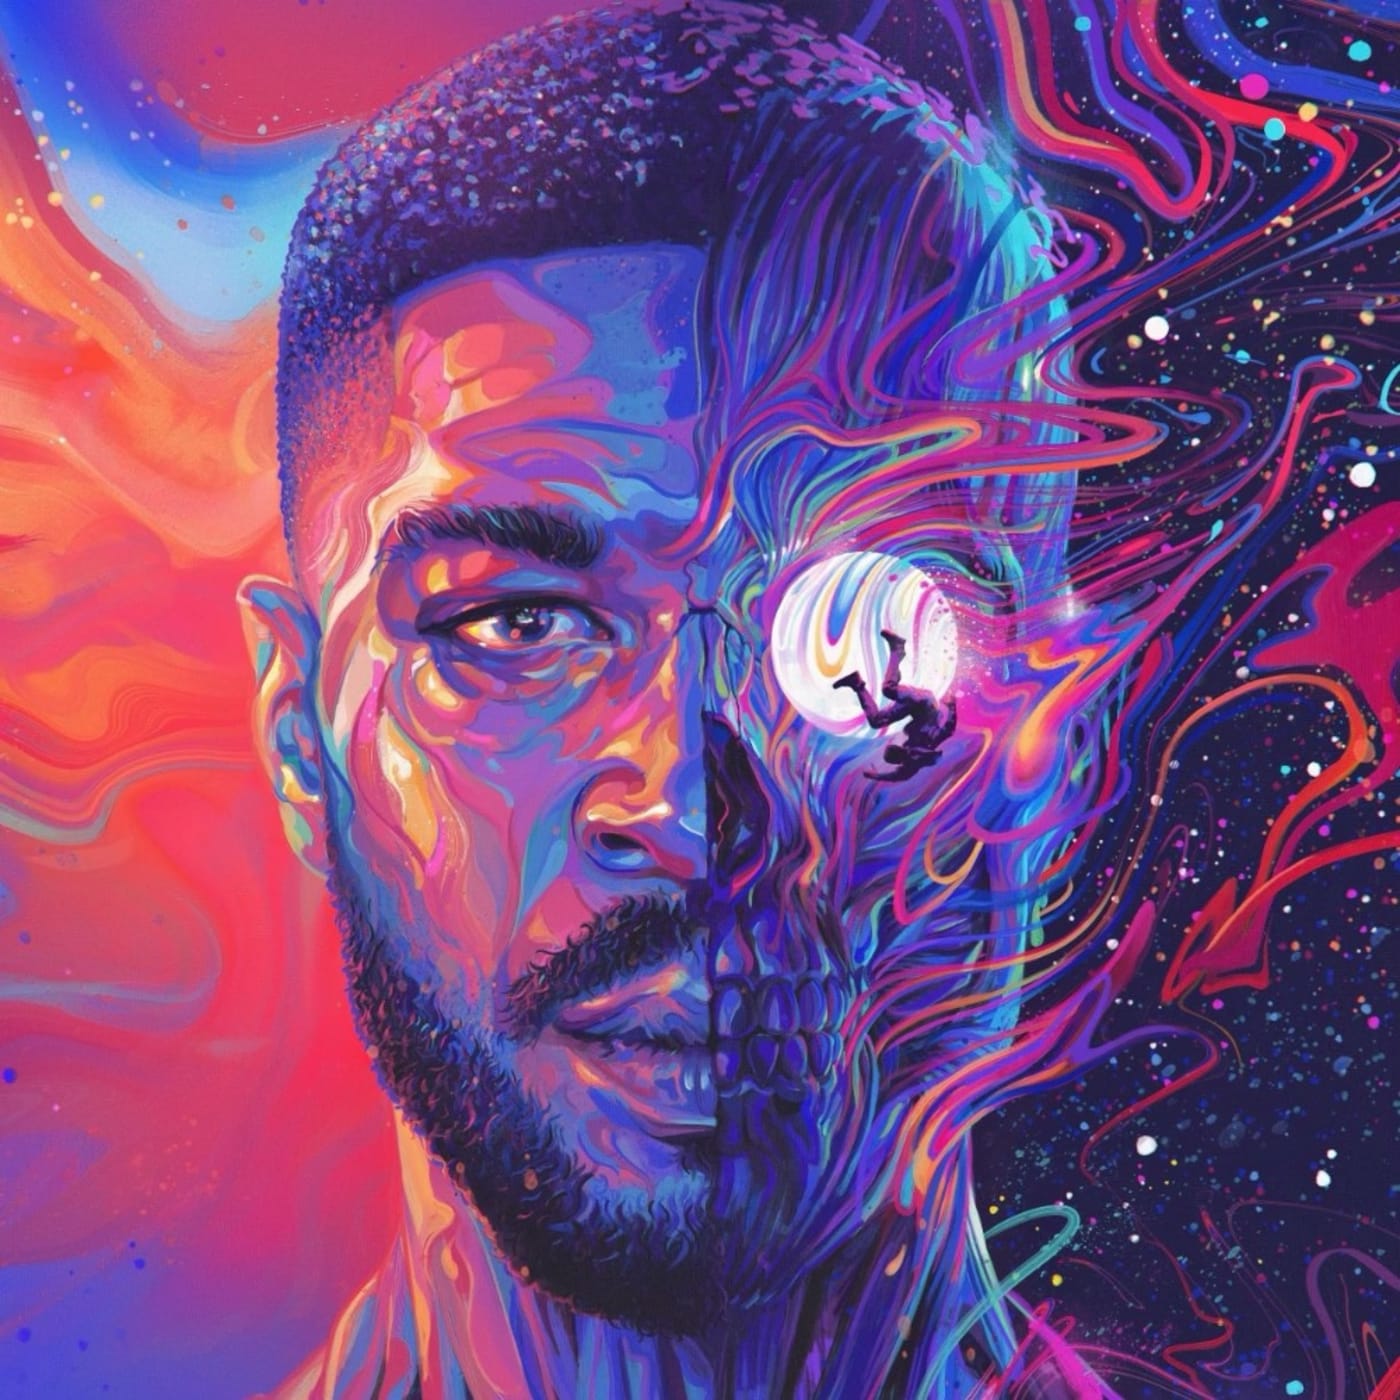 Here's the Behind Kid Cudi's 'Man on the Moon III' Cover Art | Complex